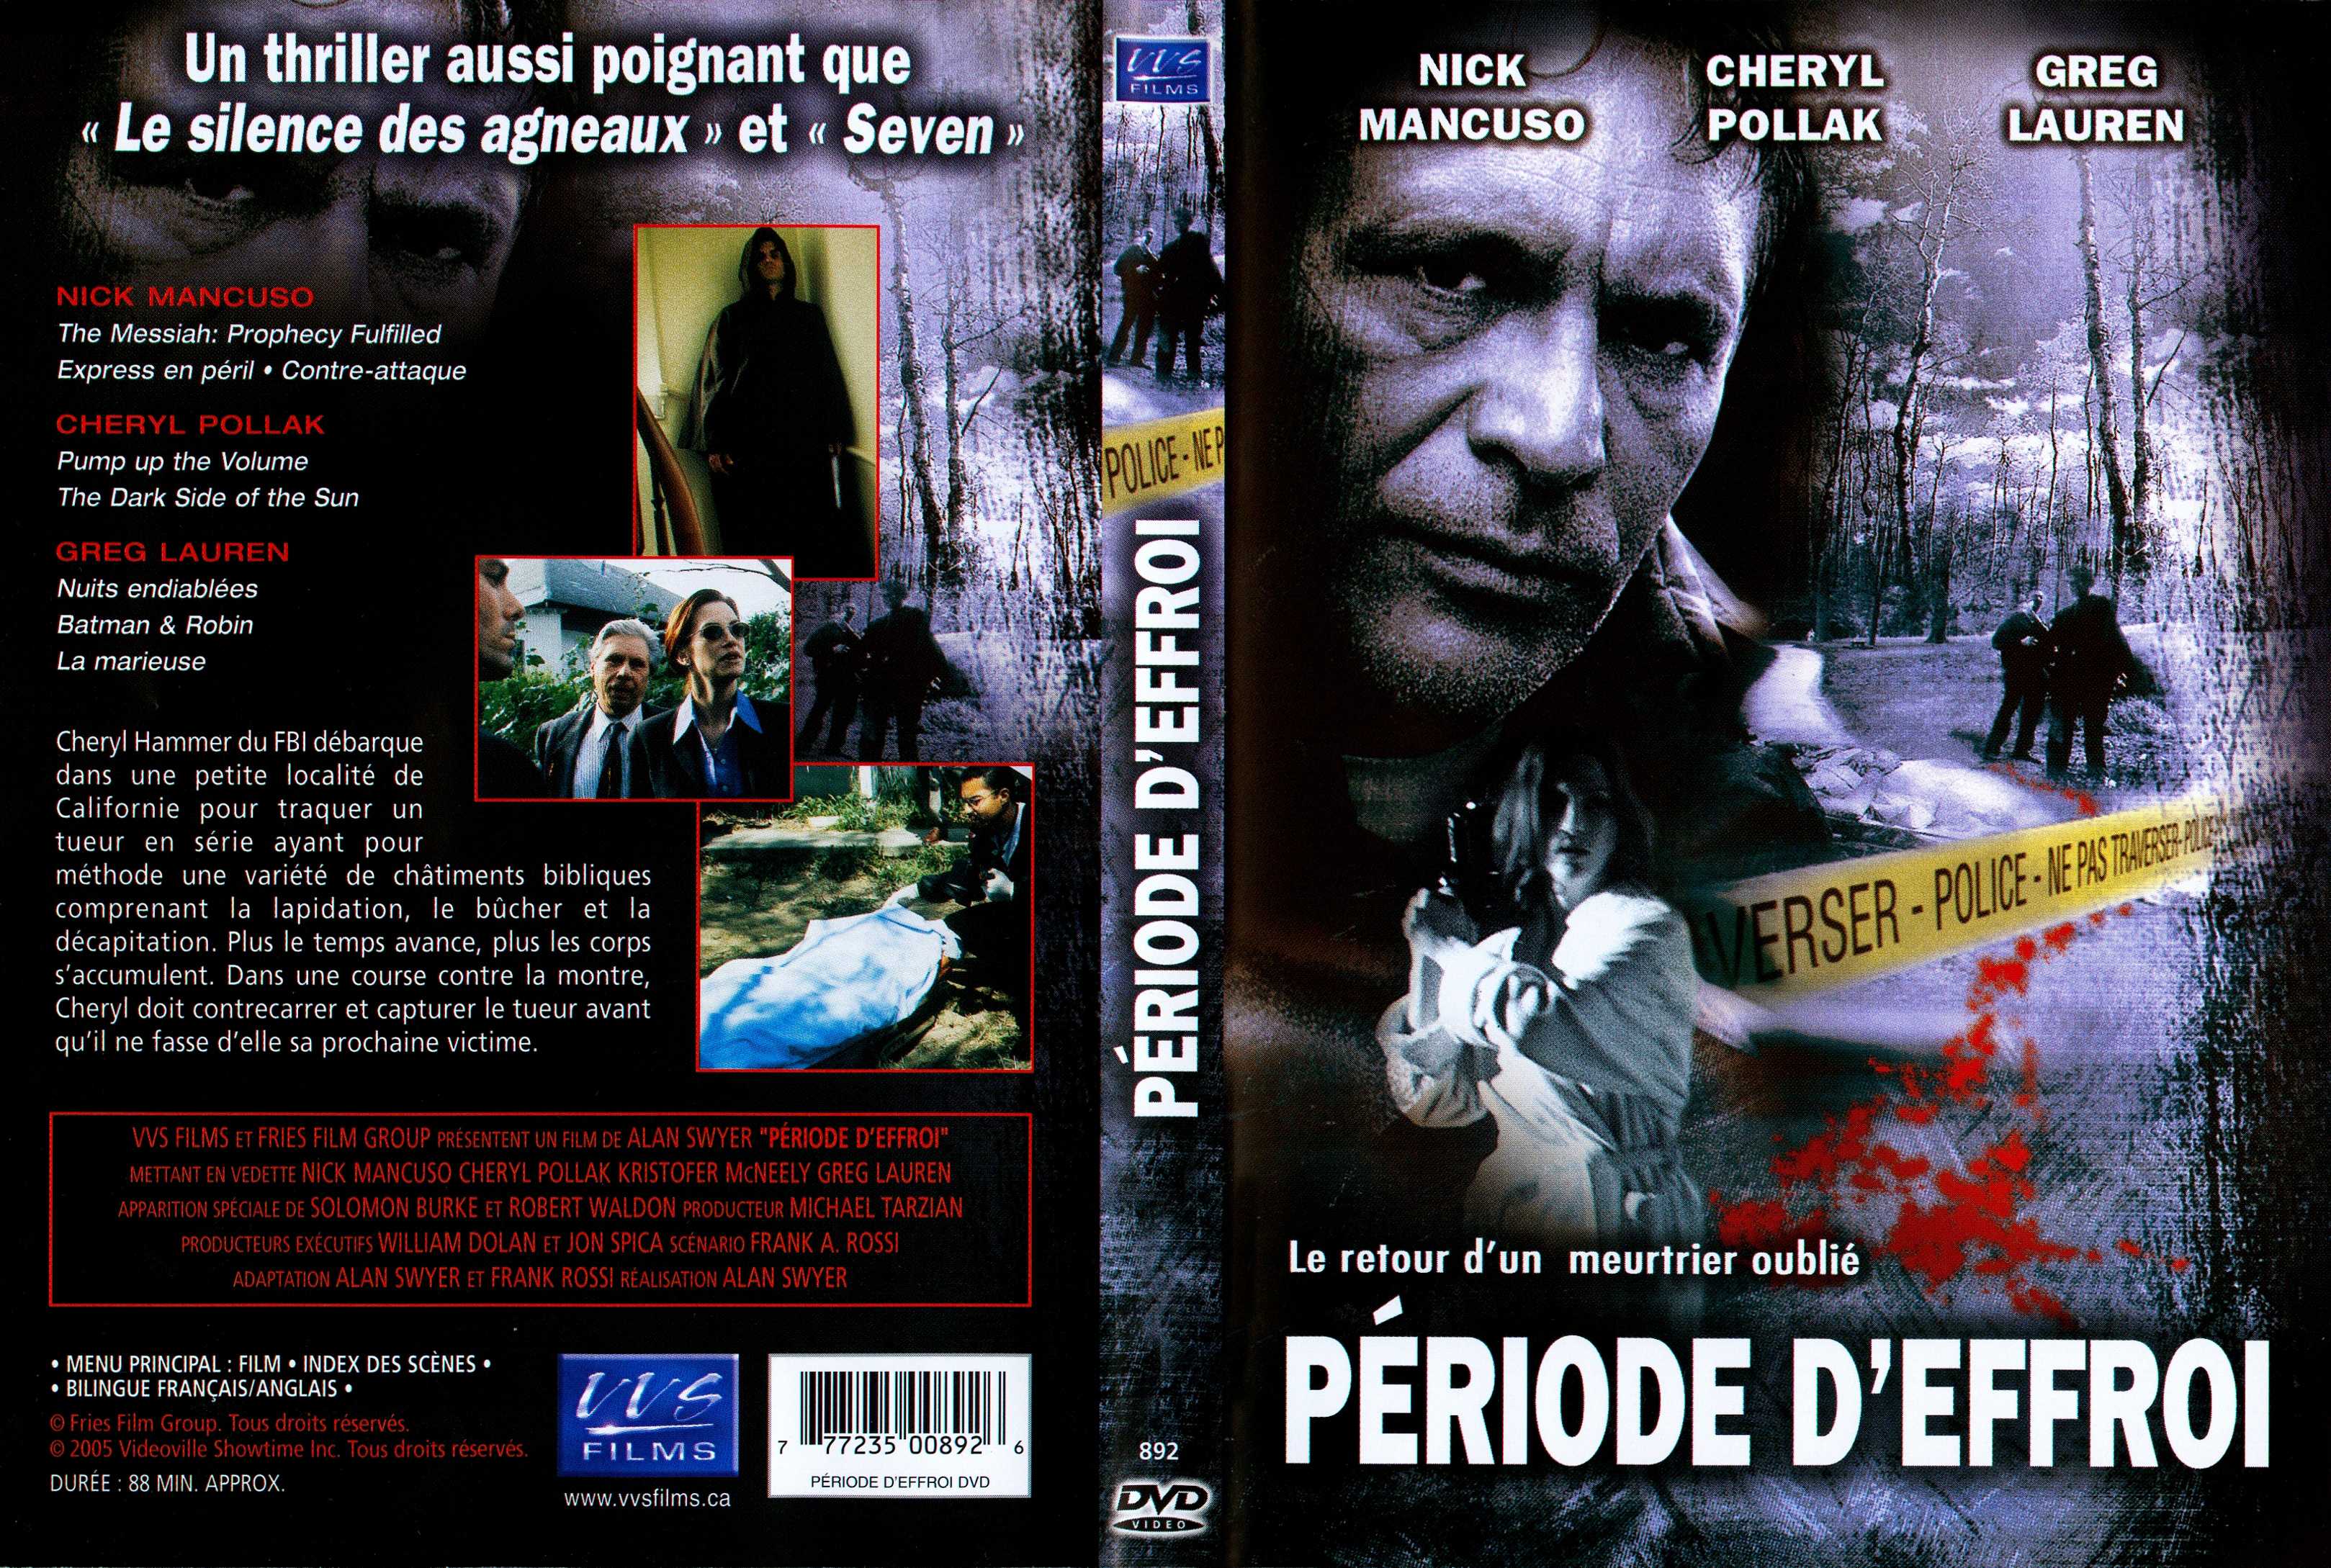 Jaquette DVD Priode d